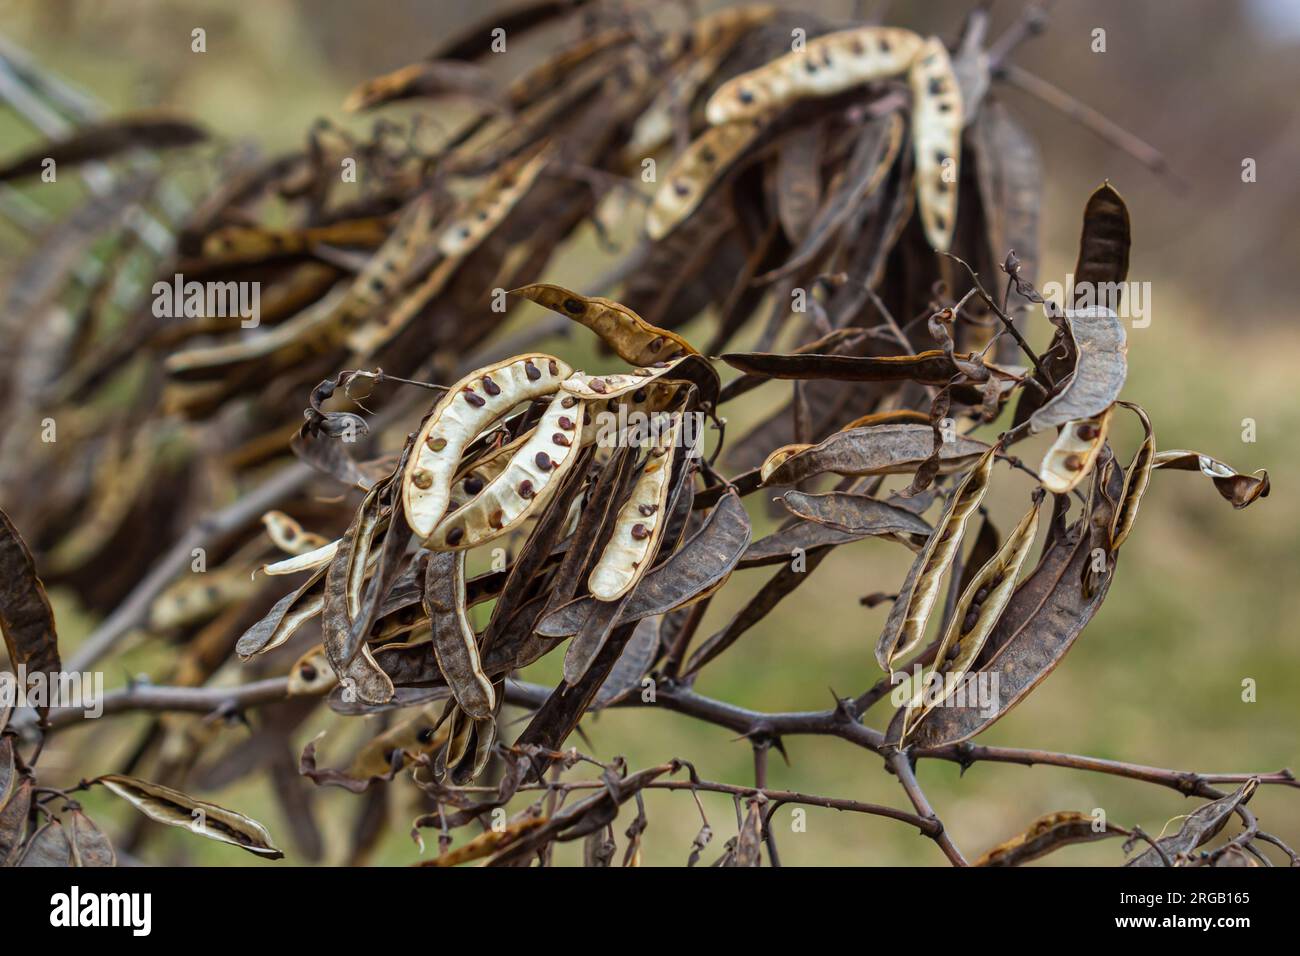 Black locust seeds hanging and dry so that the black seed fall out. Black locust seed pods. Stock Photo